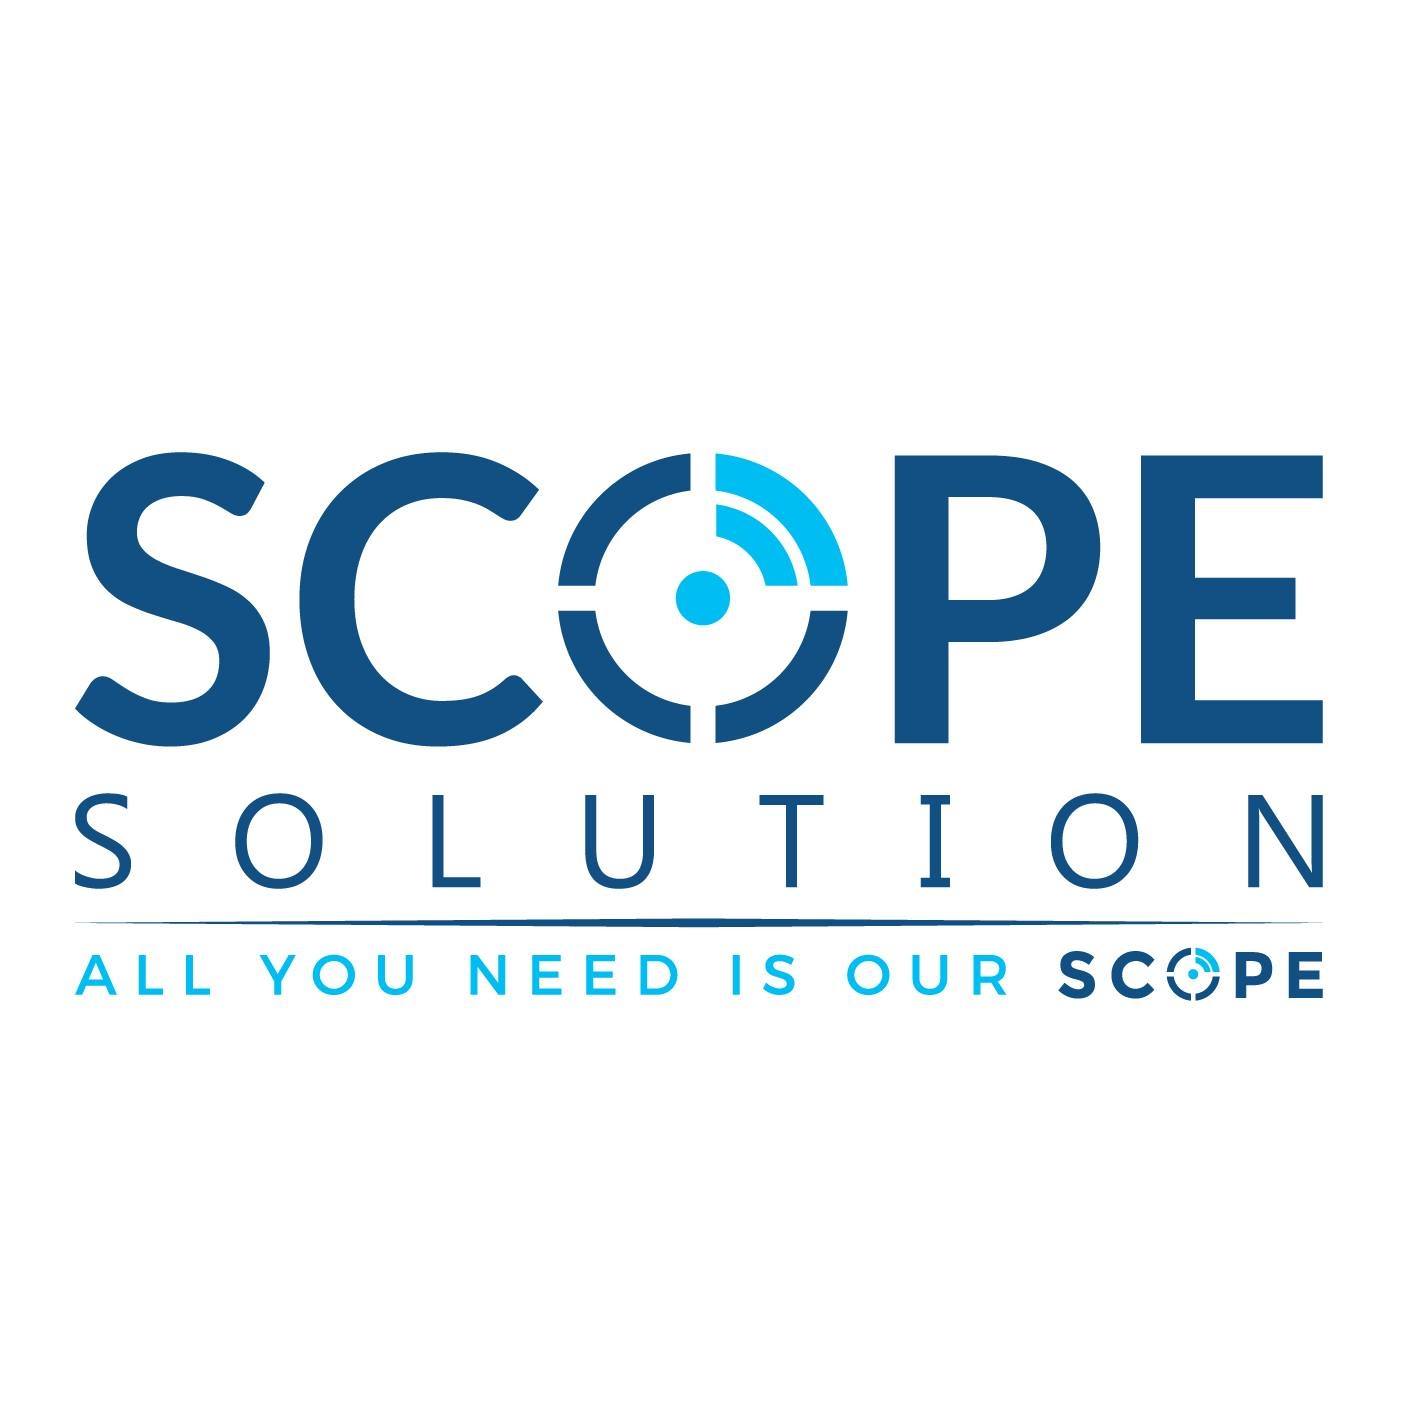 Scope Solutions